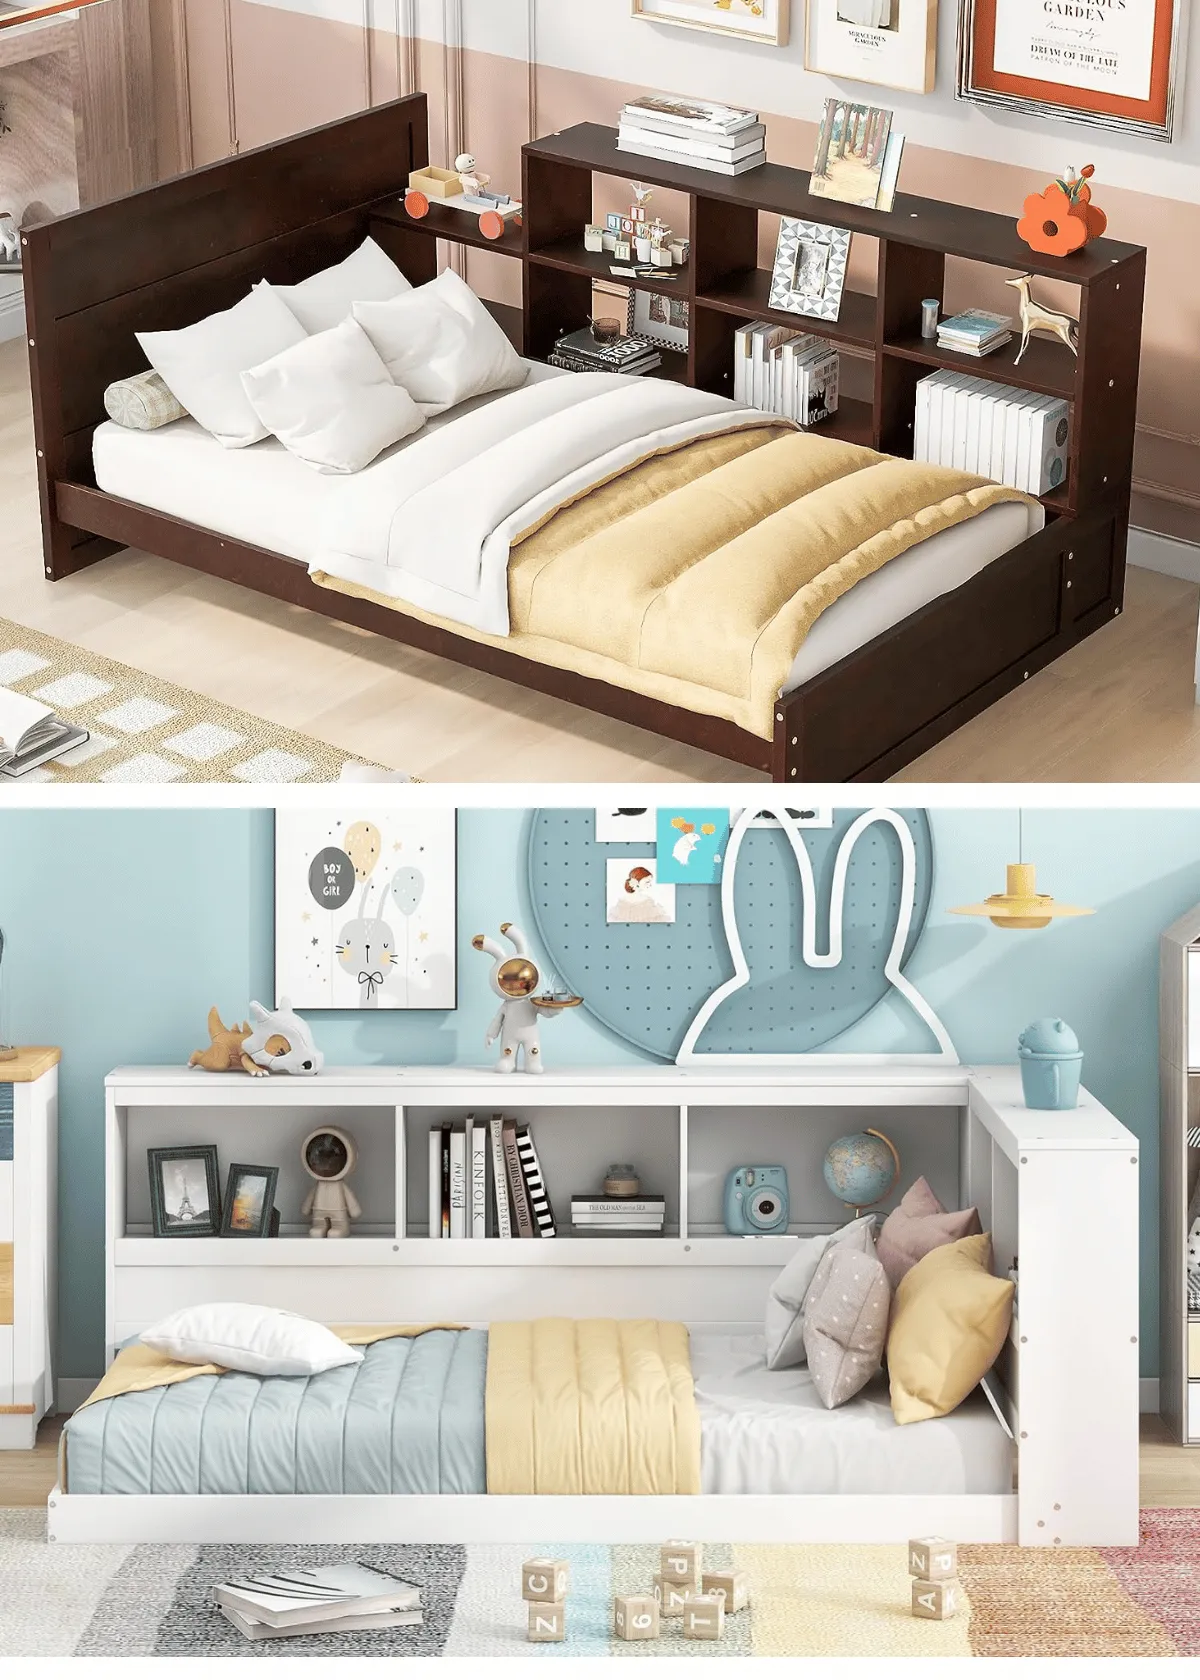 "The Best Bed Frame with Shelves to Save Space in Your Room"